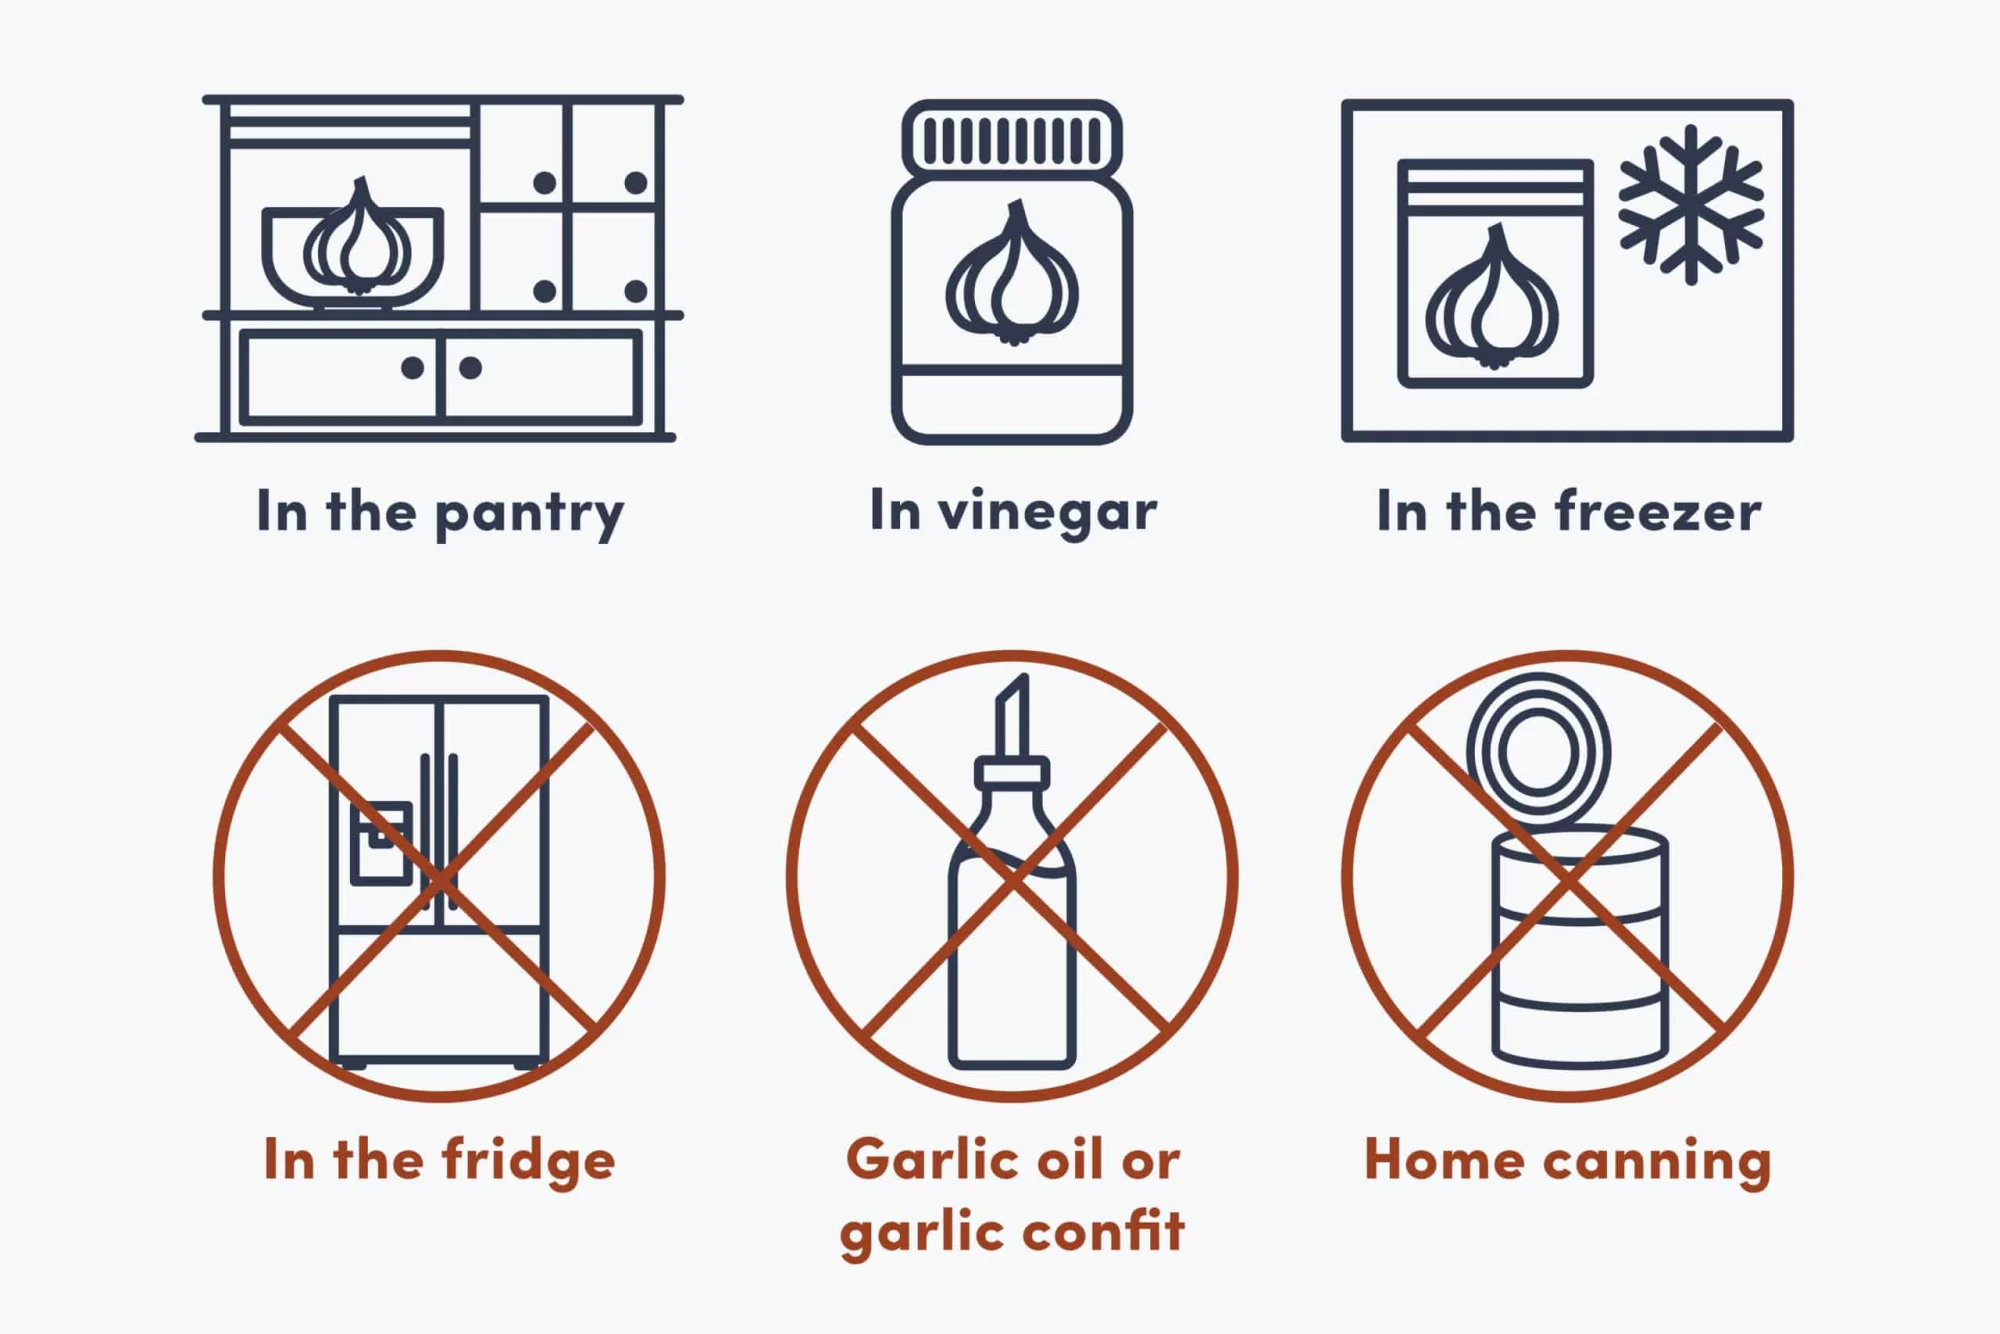 An infographic of how to store garlic showing no storage in oil